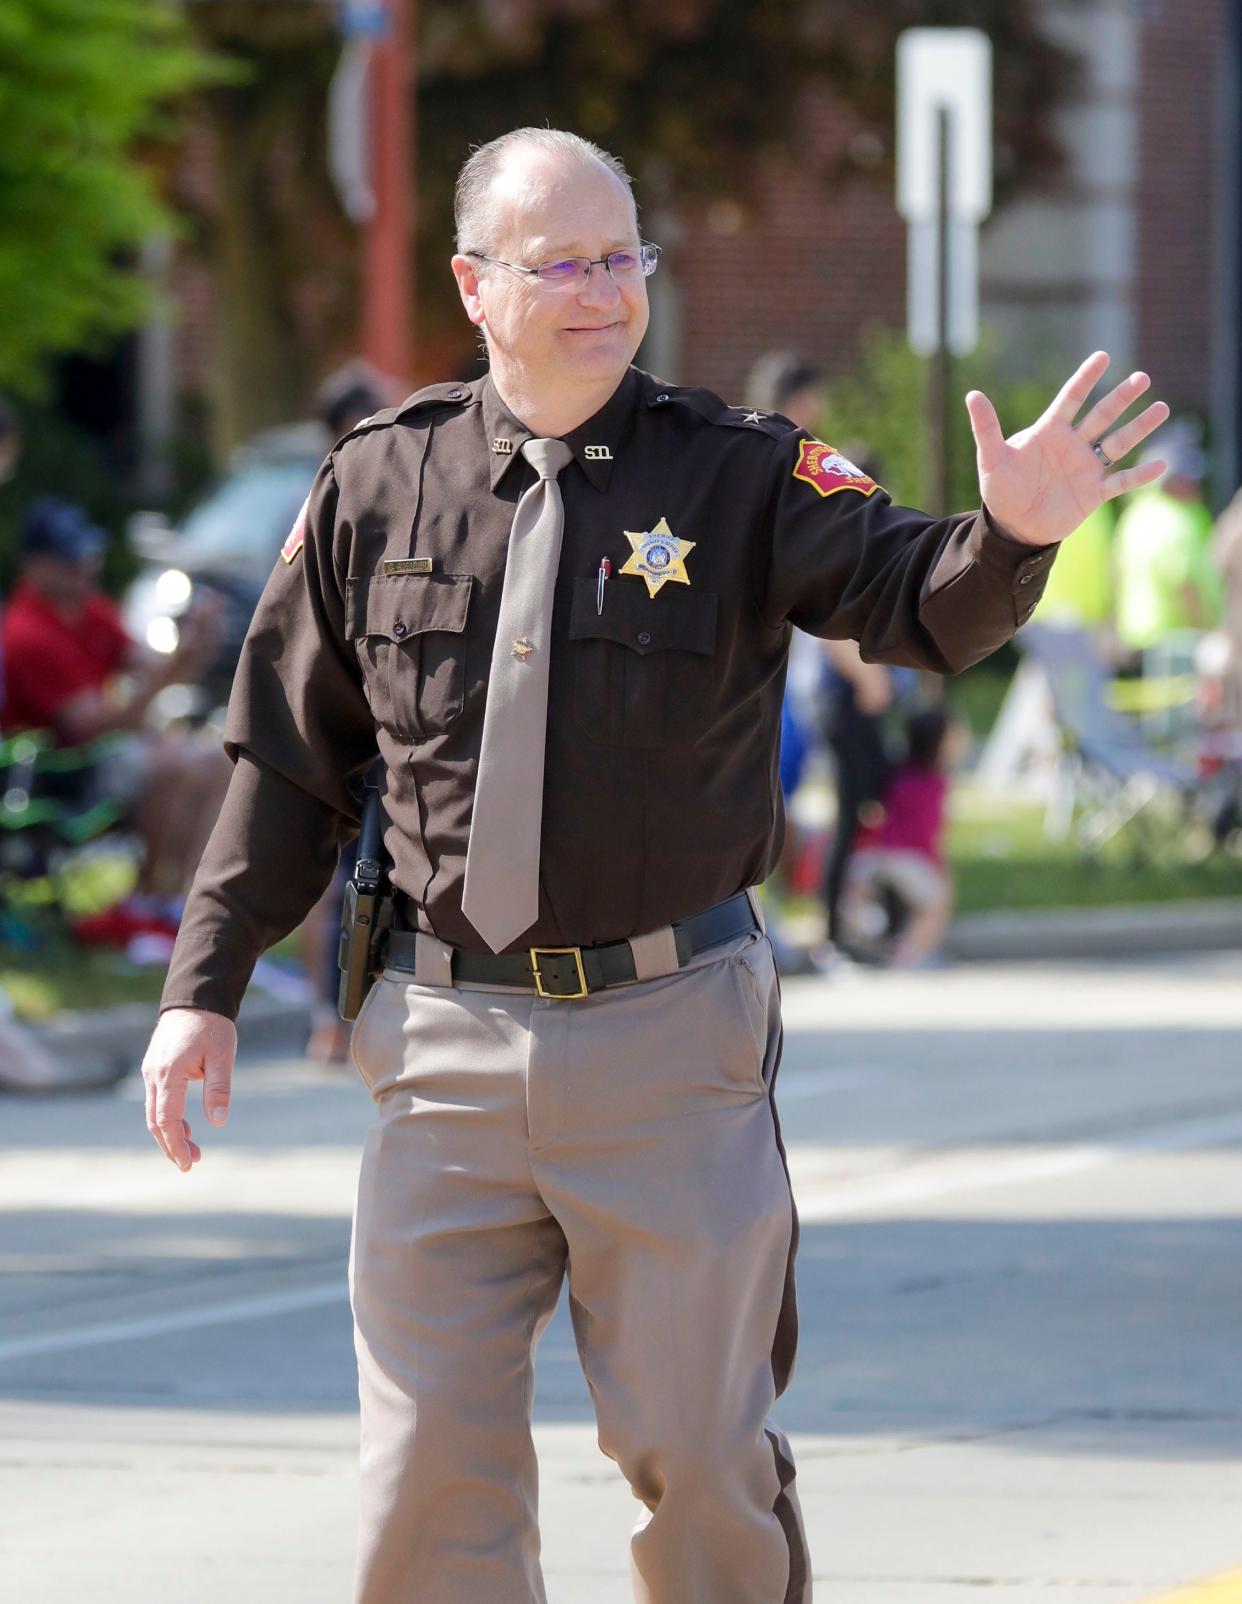 Sheboygan County Sheriff Cory L. Roeseler waves while marching in the Memorial Day parade, Monday, May 29, 2023, in Sheboygan, Wis.